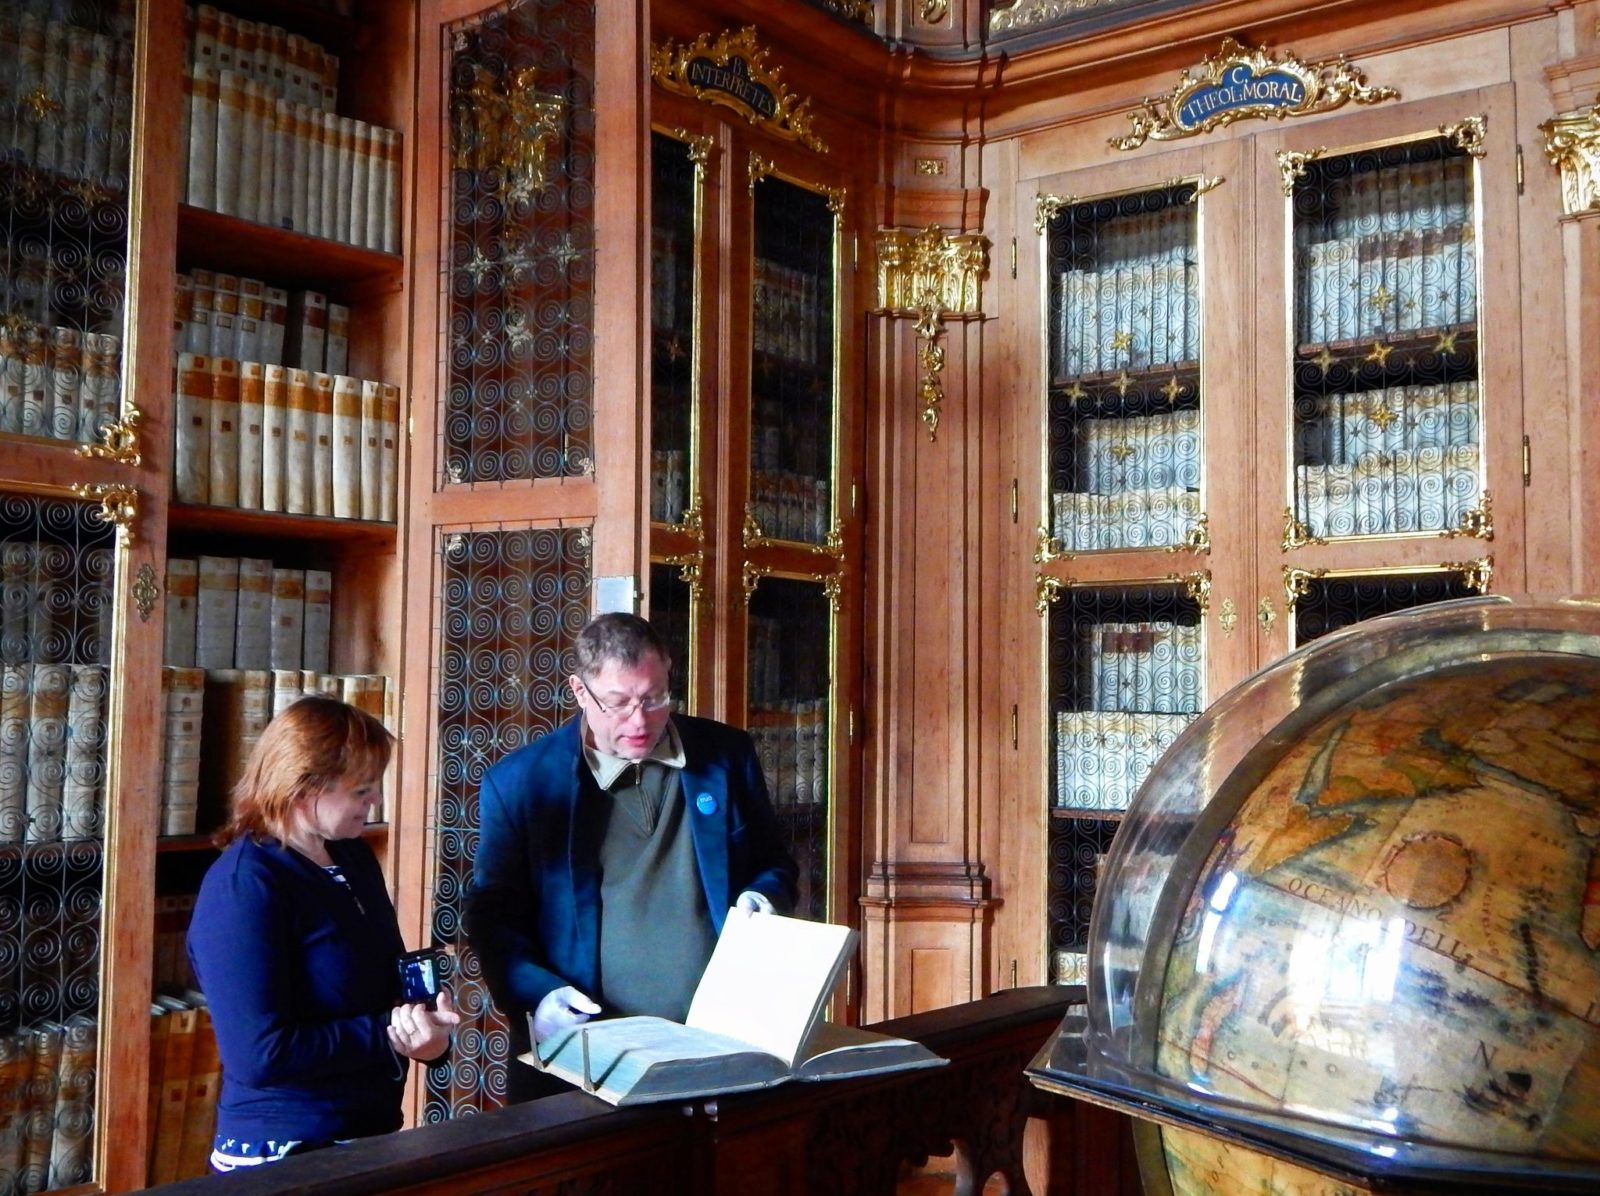 Female and male historians stand reviewing a book in a library. Globe is in view.